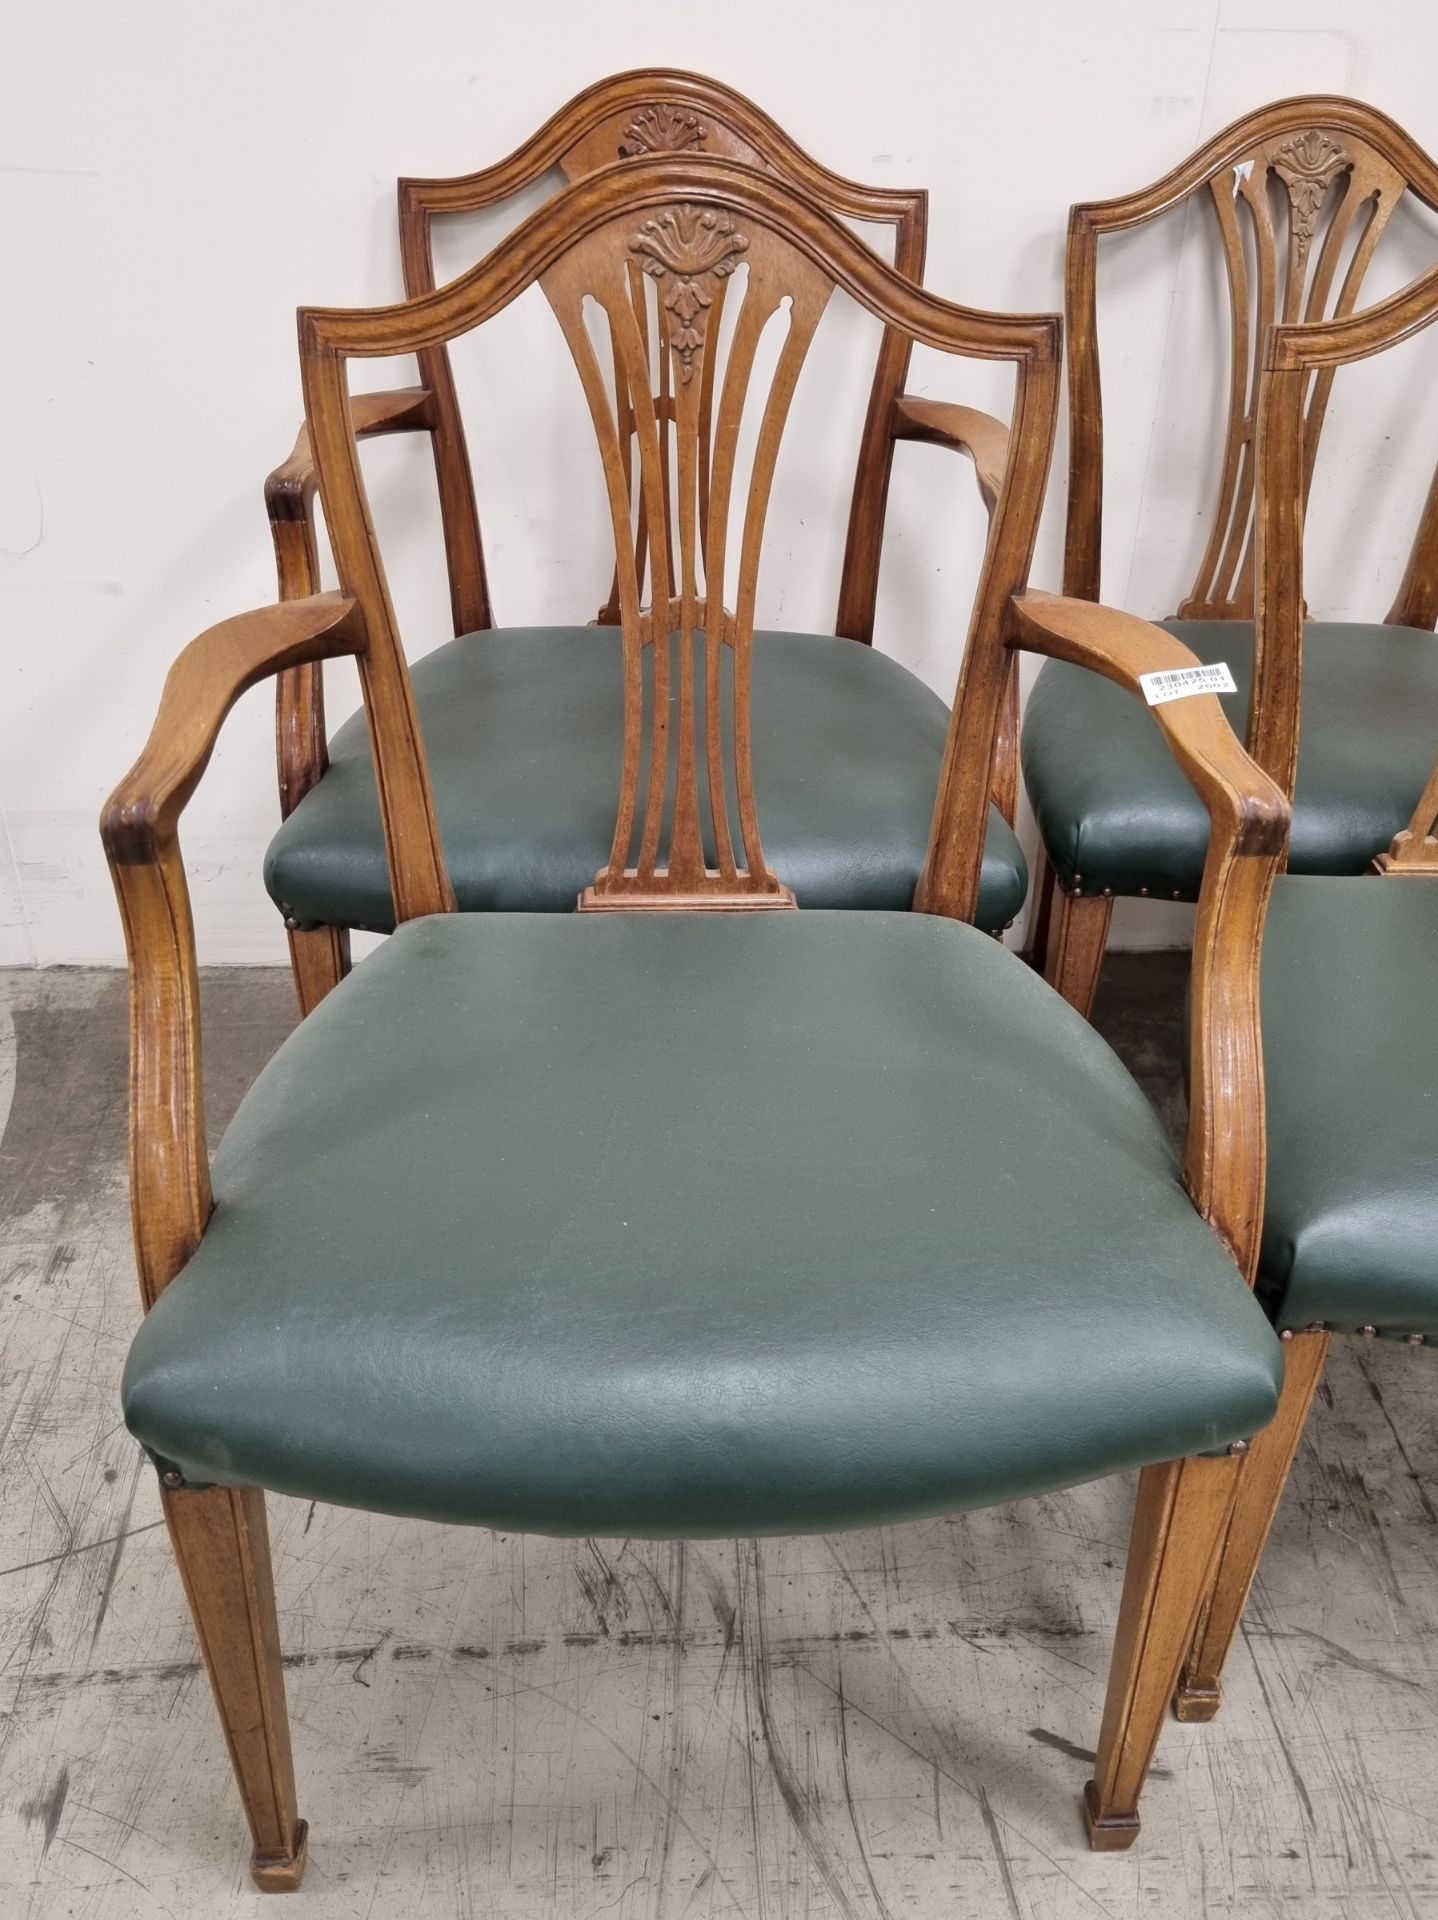 14x 1970 - 1980's Wooden chairs - Image 7 of 10